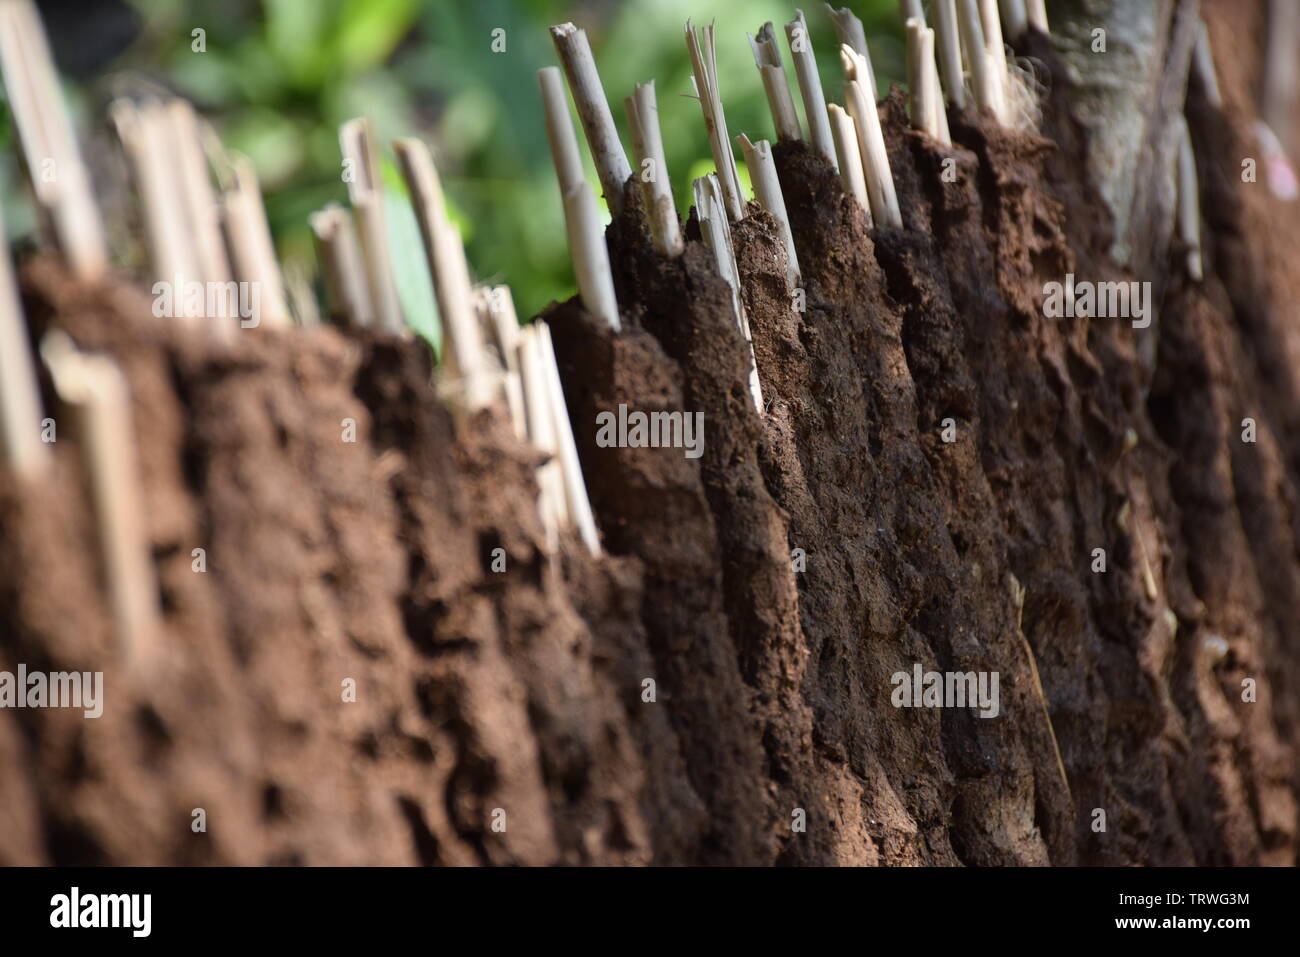 cow dung jute stick fuel: indigenous fuel technology in rural south asia made from cow dung and jute stick, dried and used for domestic cooking. Stock Photo